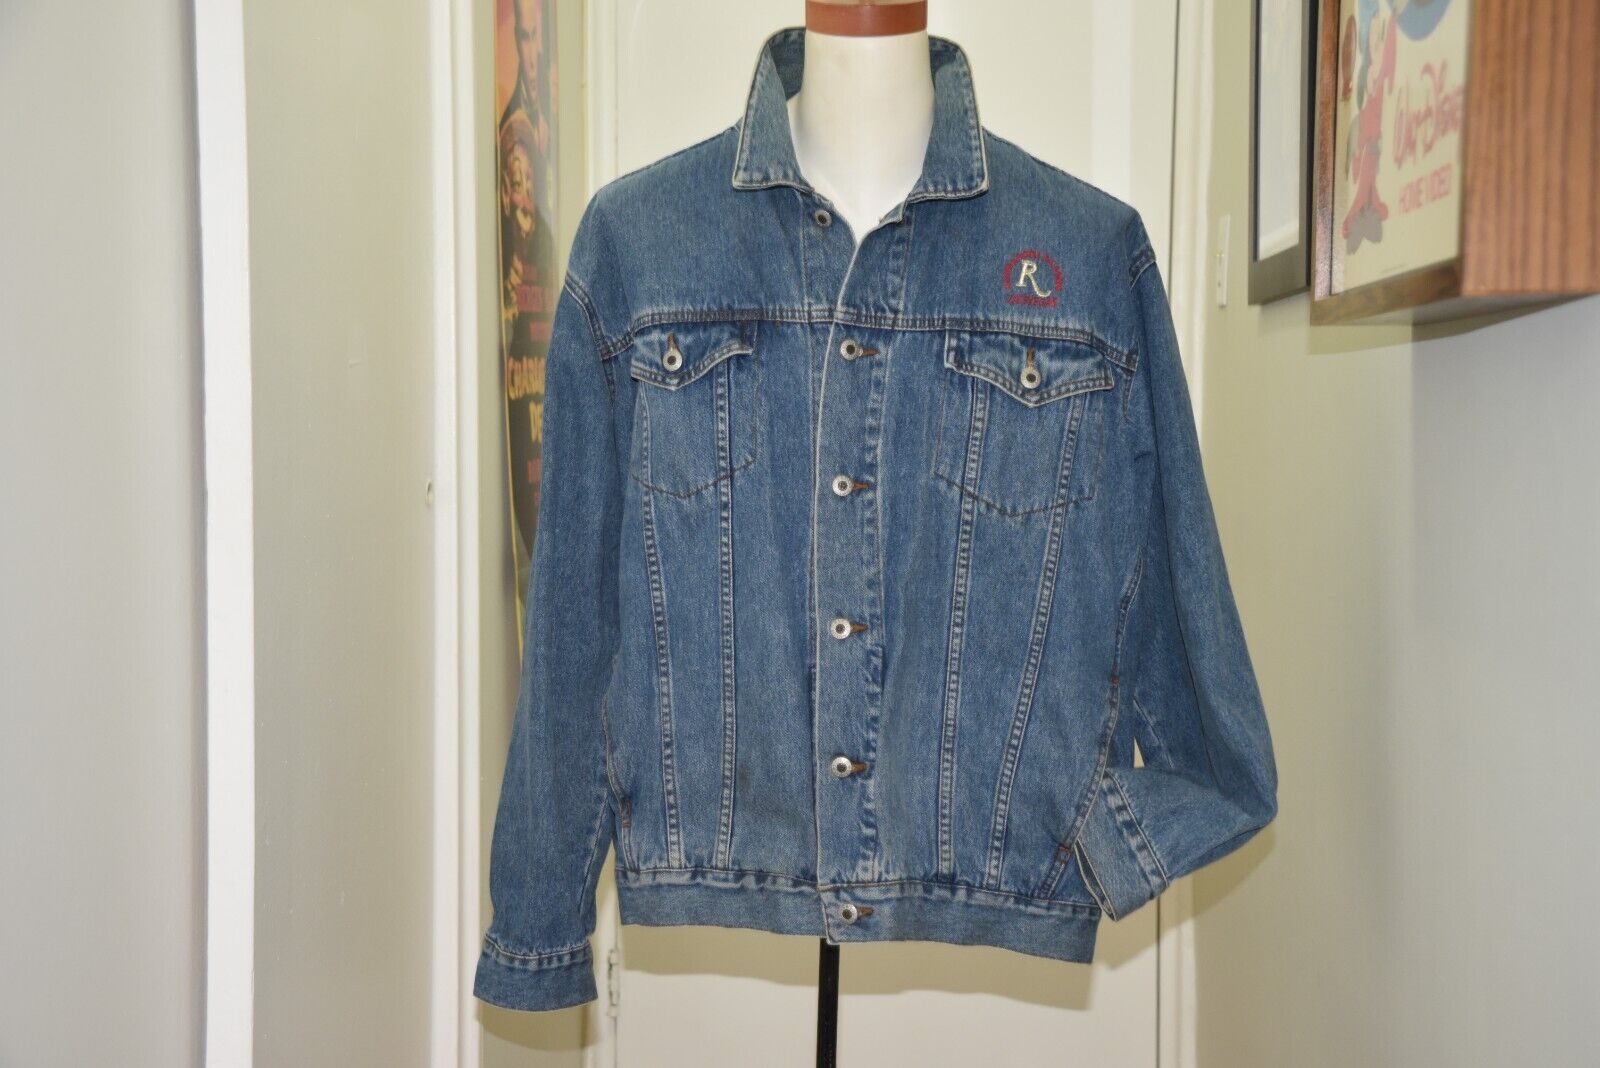 MENS VTG RIVIERA HOTEL AND CASINO of LAS VEGAS JEANS JACKET L SALE+FREE SHIPPING